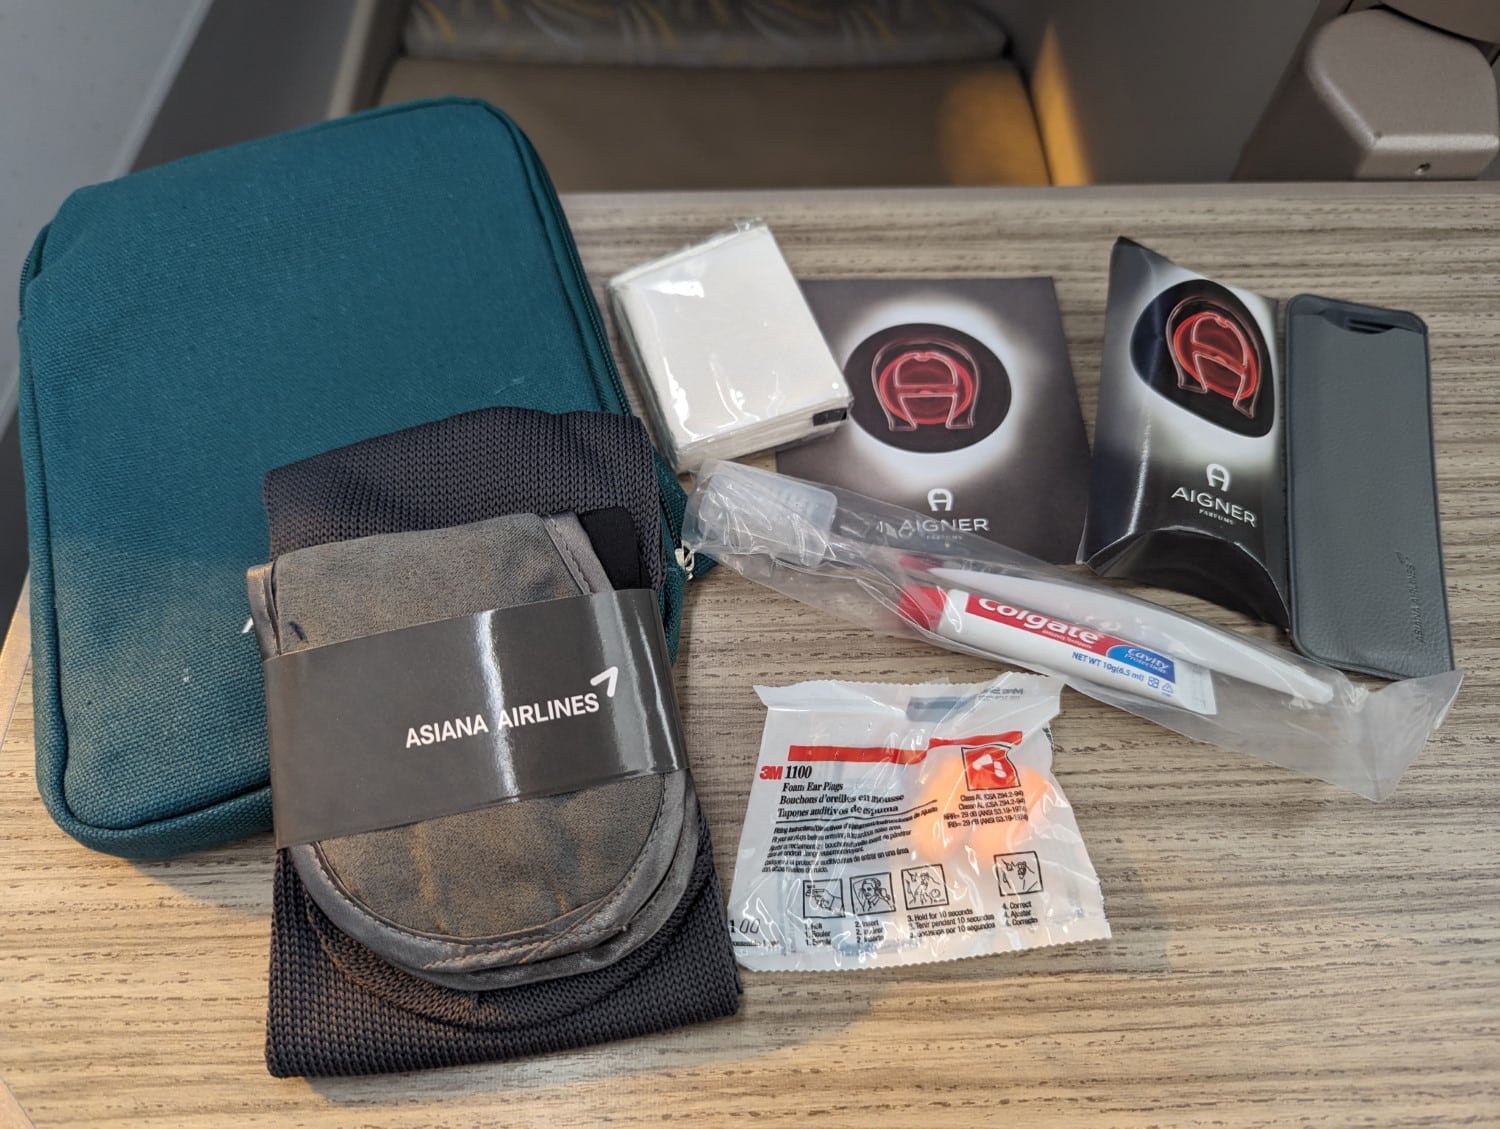 asiana airlines business class a350 amenity kit contents